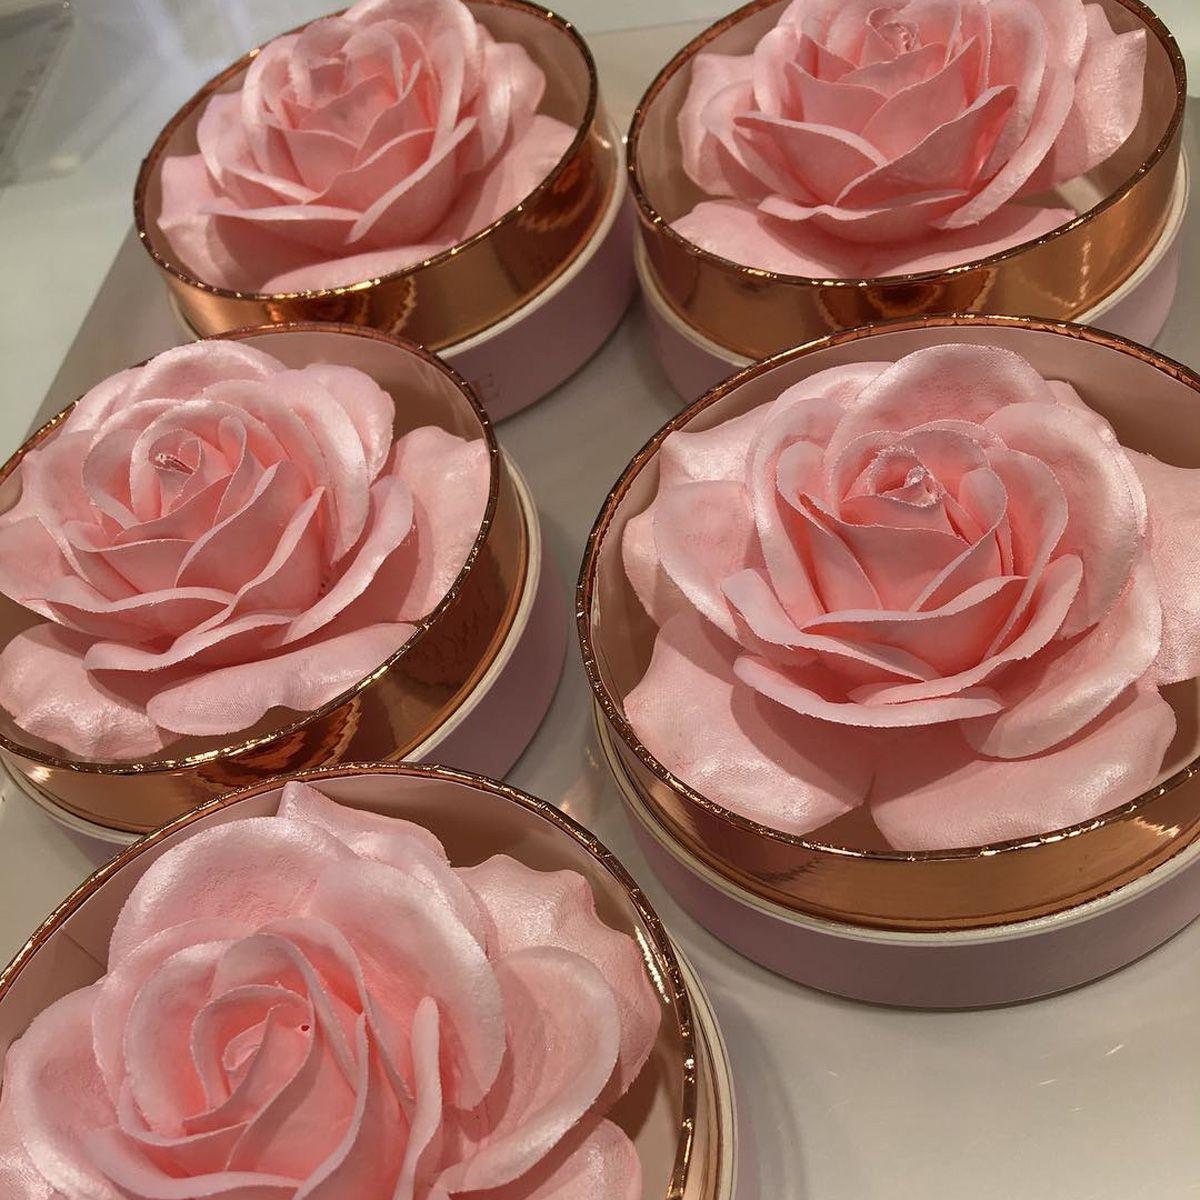 Lancome Flower Logo - Lancôme Launches New Rose-Shaped Highlighter and it's Amazing